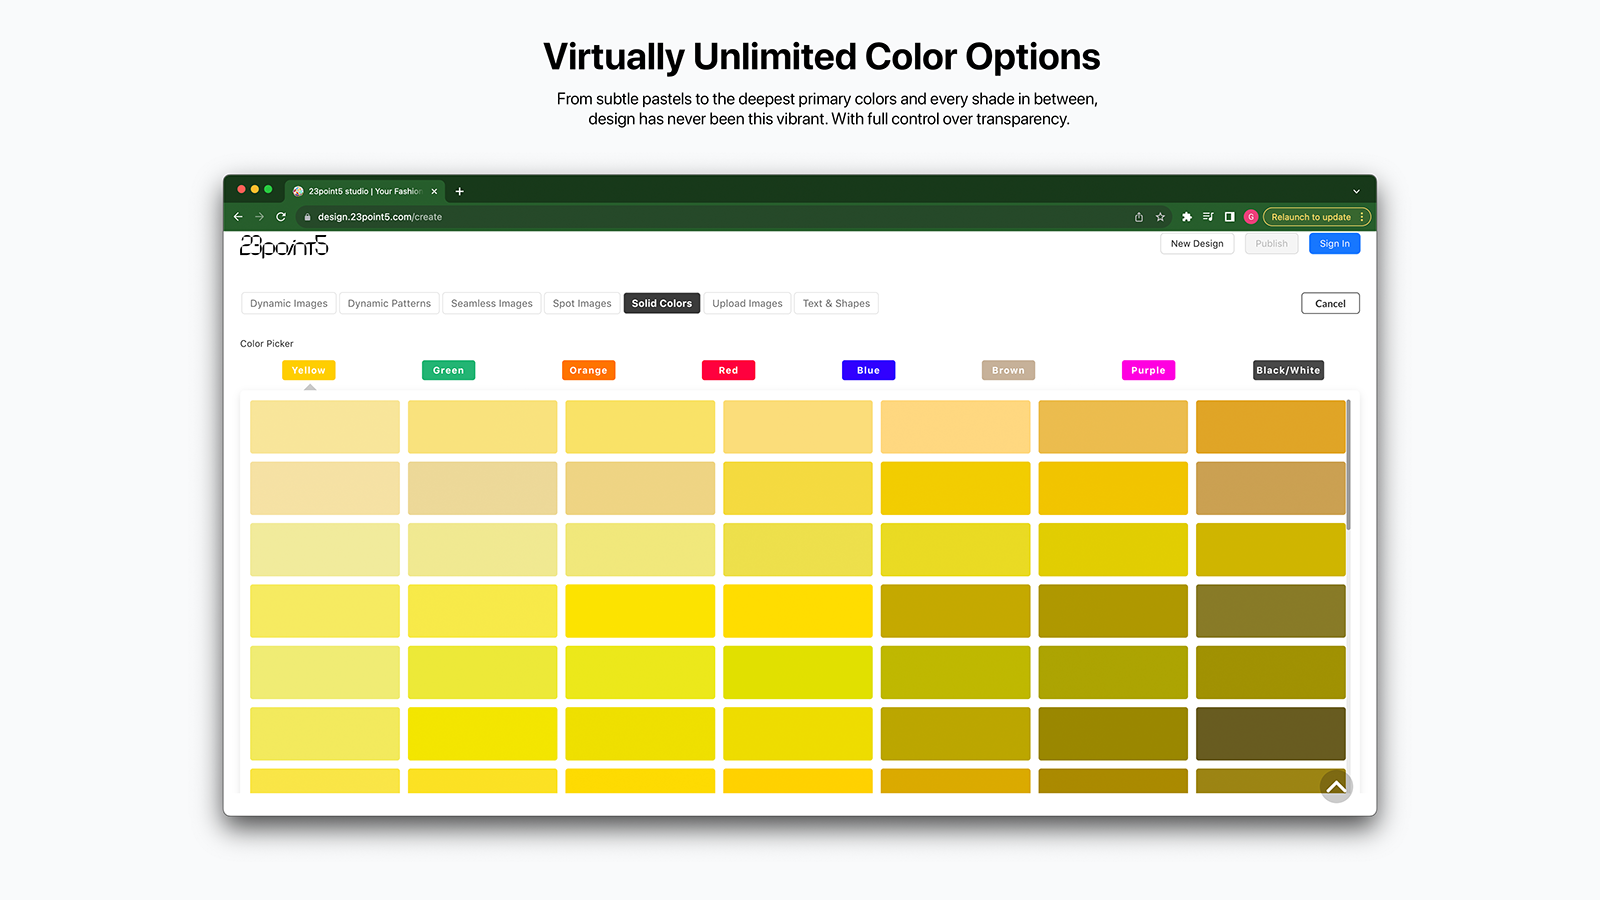 Virtually unlimited color options